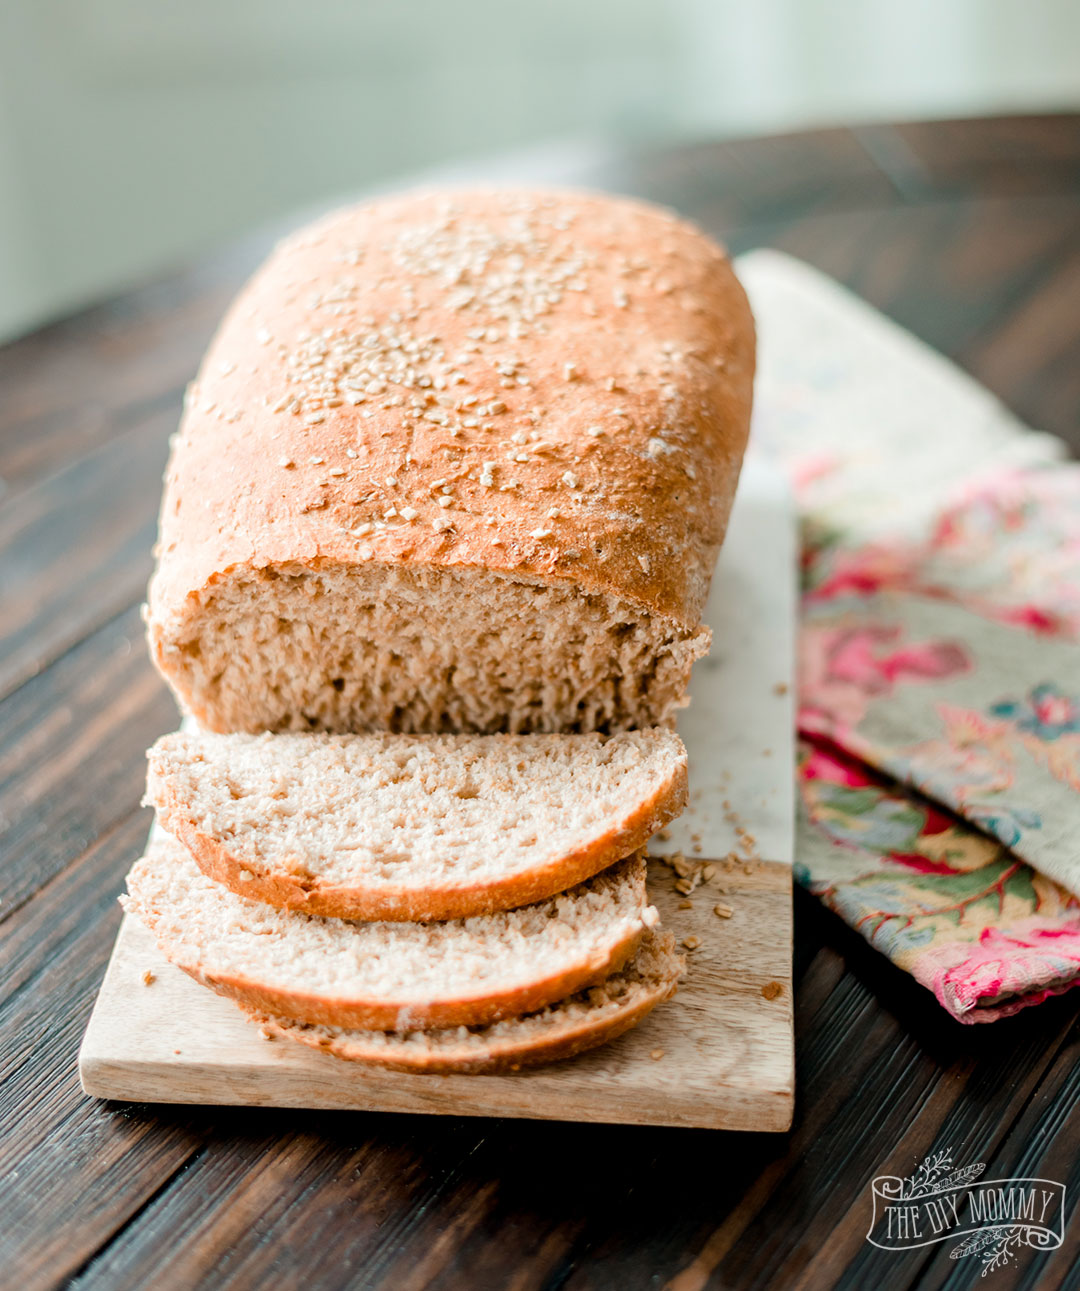 This whole wheat honey sourdough bread recipe is simple to make, requires few ingredients, and tastes hearty & delicious.